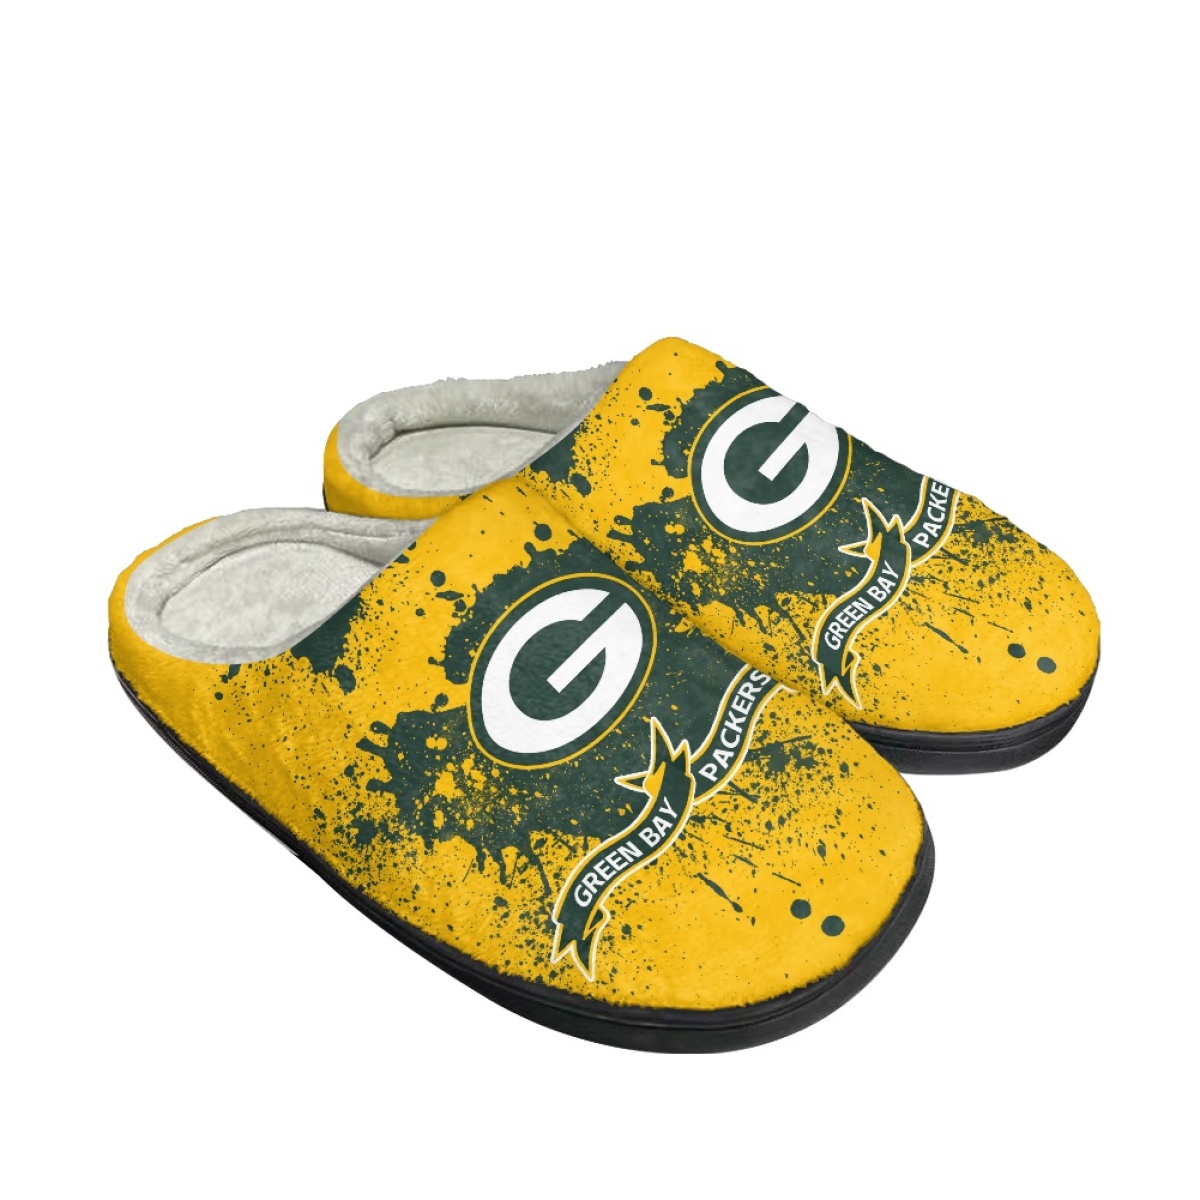 Women's Green Bay Packers Slippers/Shoes 006